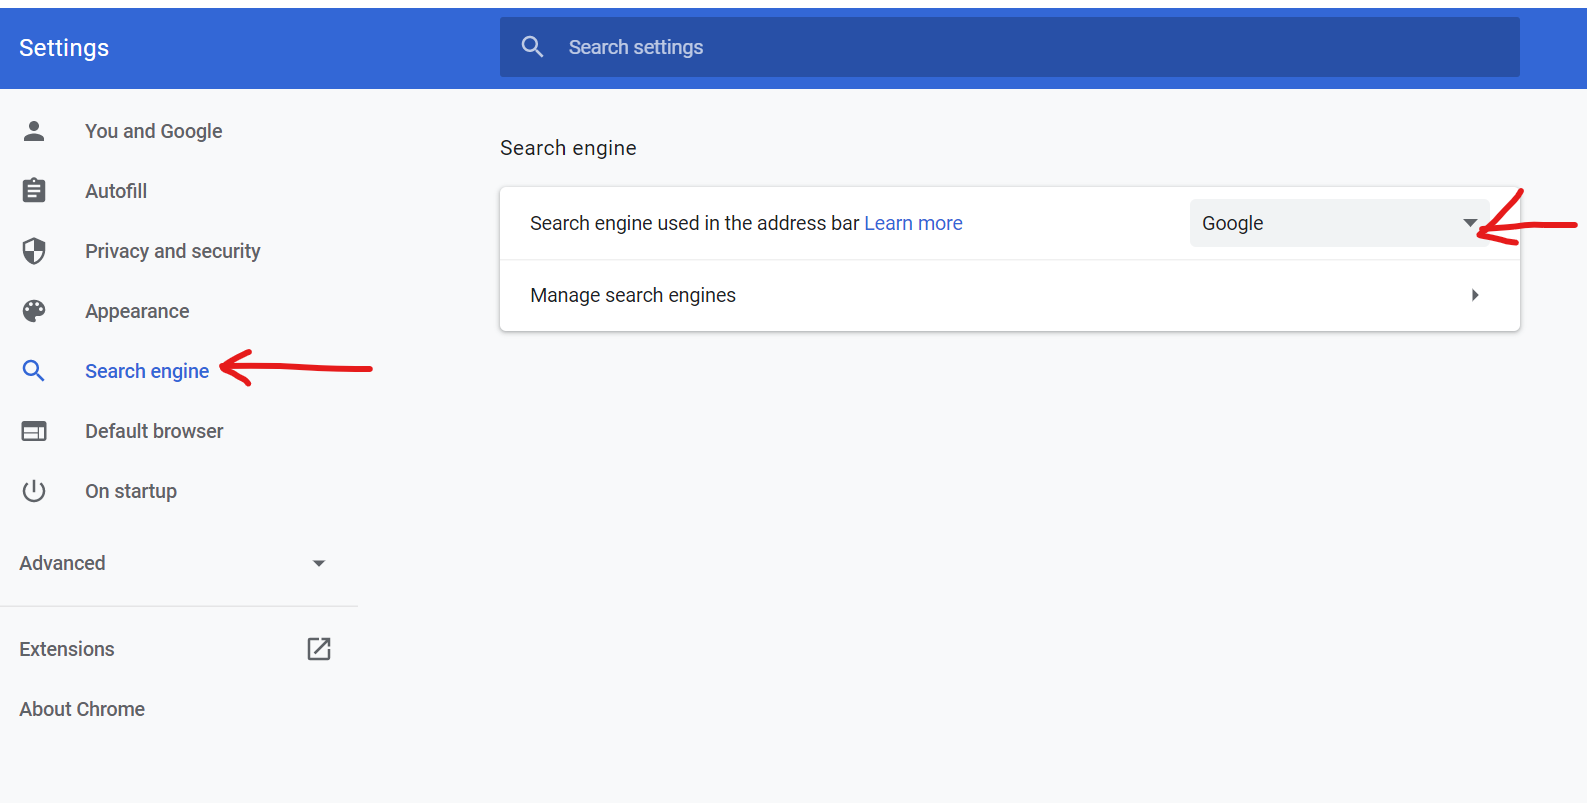 How To Change Your Default Search Engine in Google Chrome?